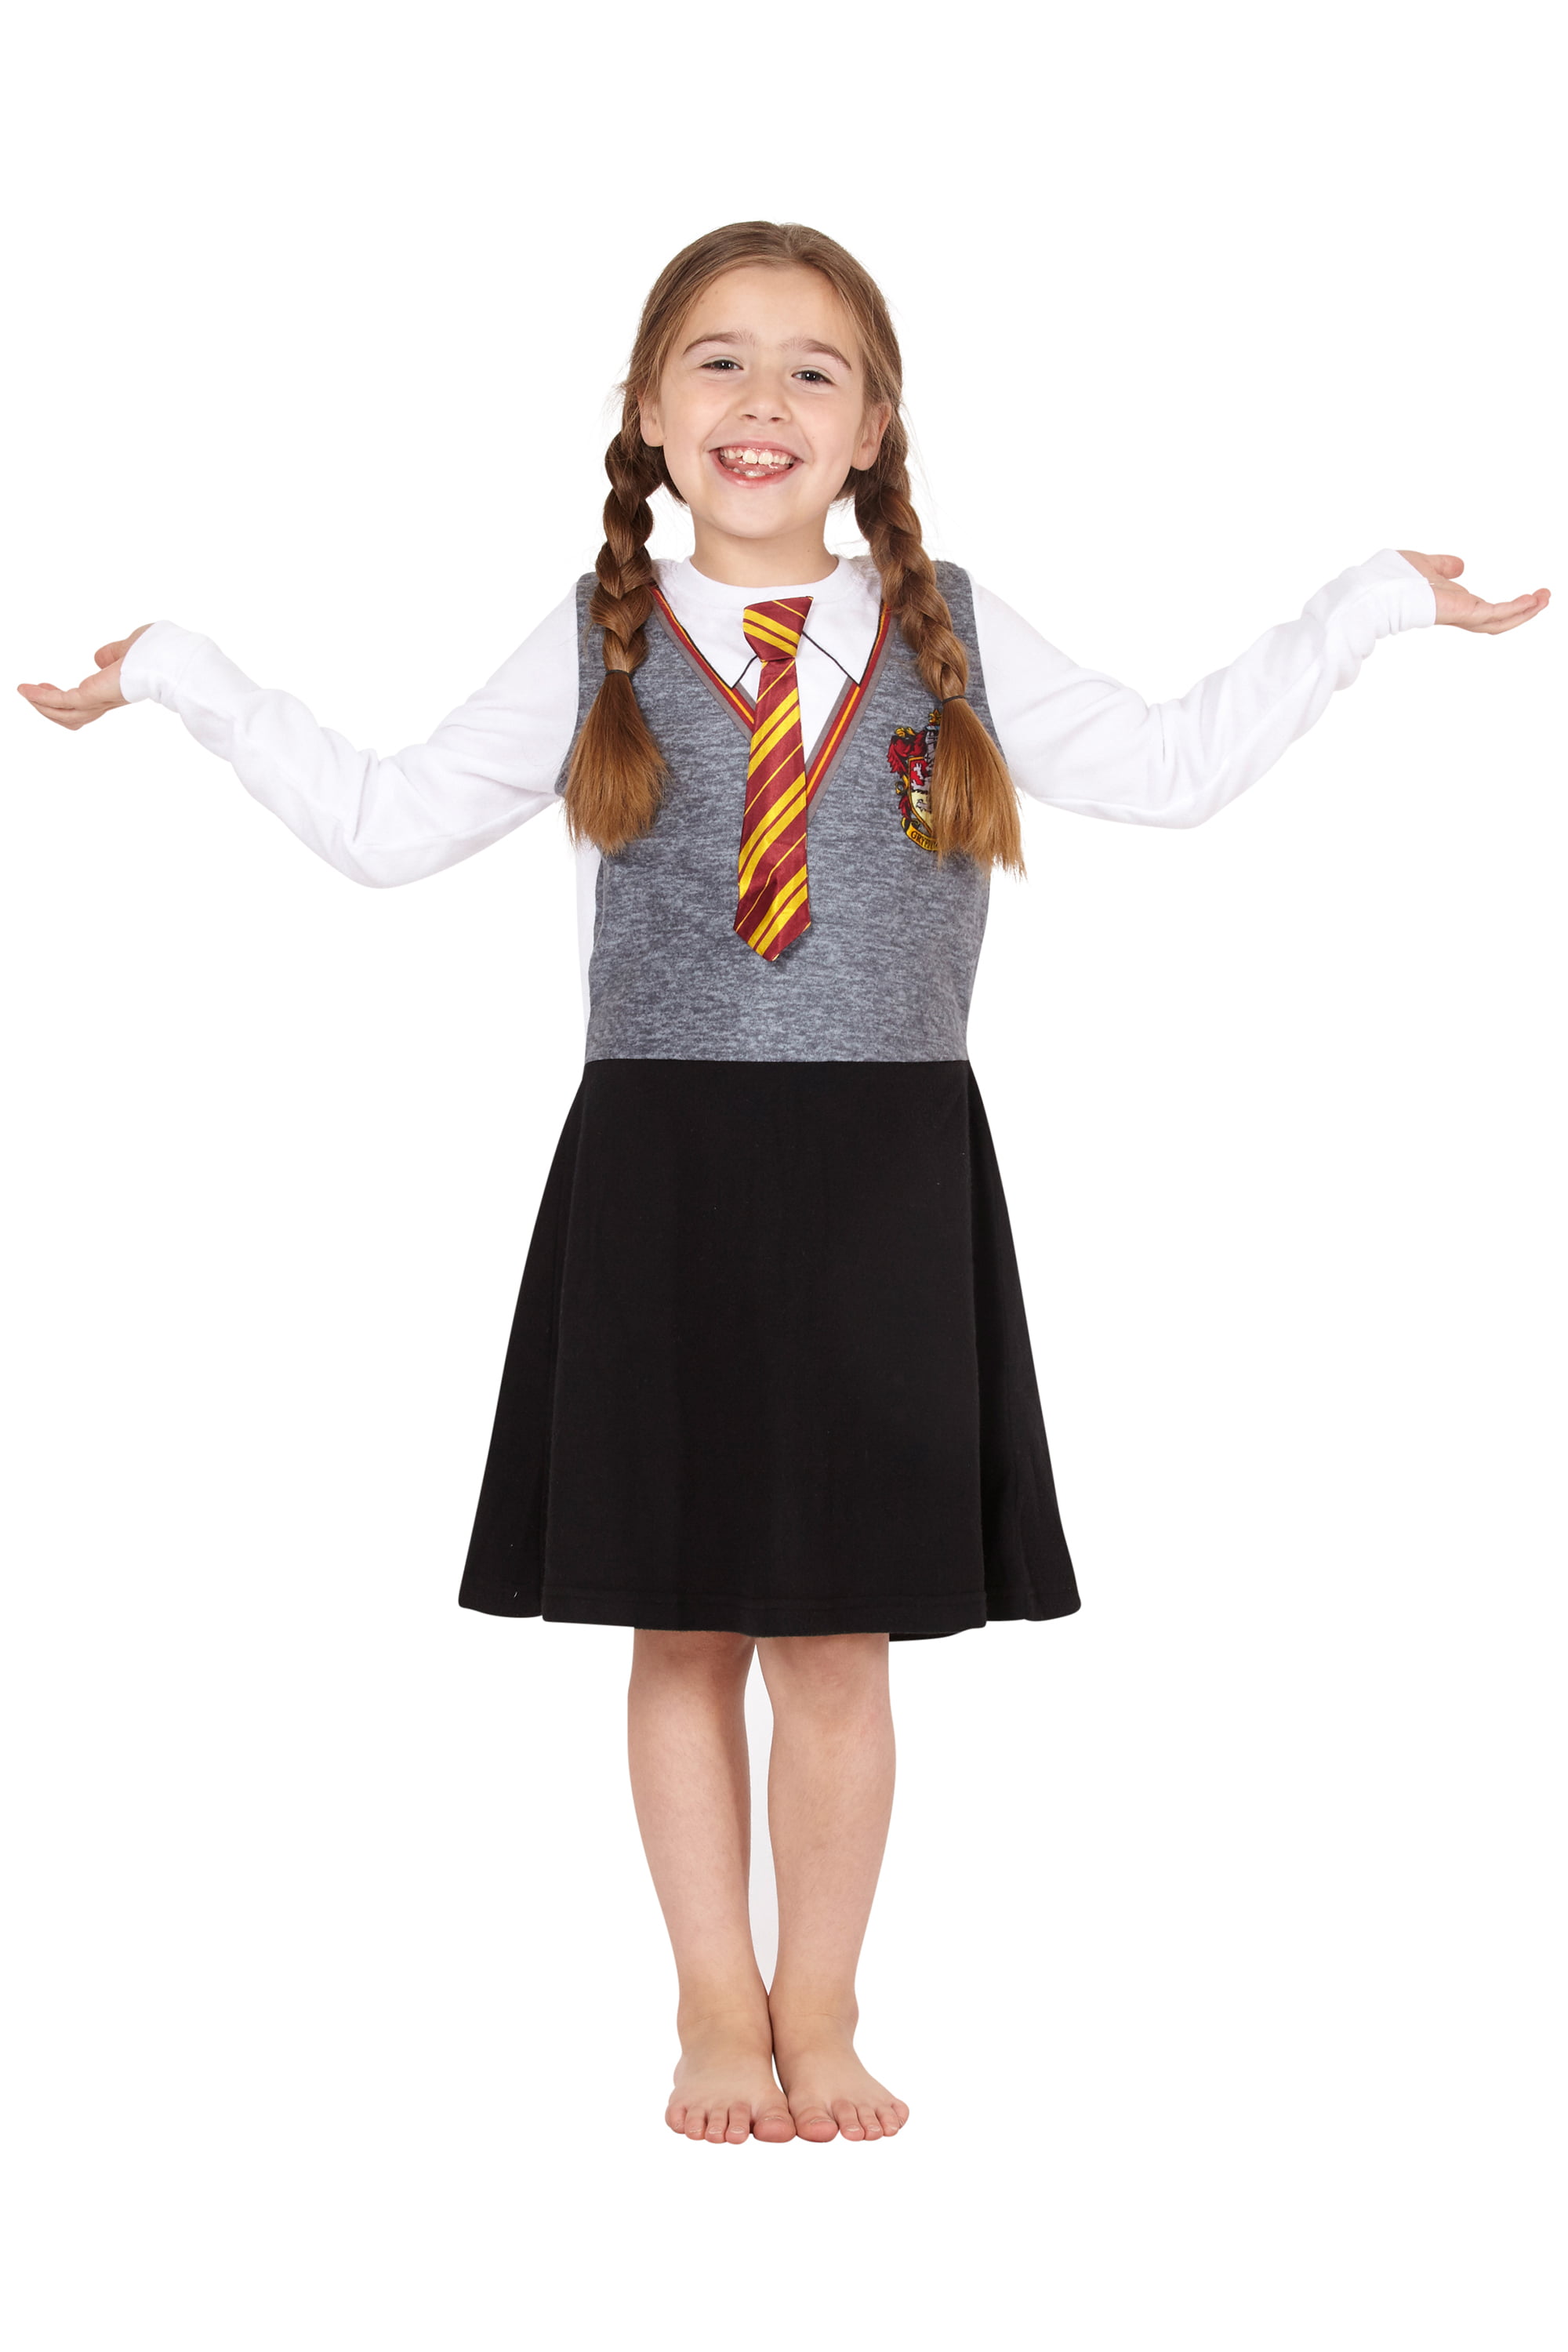 Hermione Granger Costume Kids, Harry Potter Costume 9 Pieces Set Robe  Sweater Shirt Hat Tie Glasses Magic Wand Scarf Skirt Or Pants